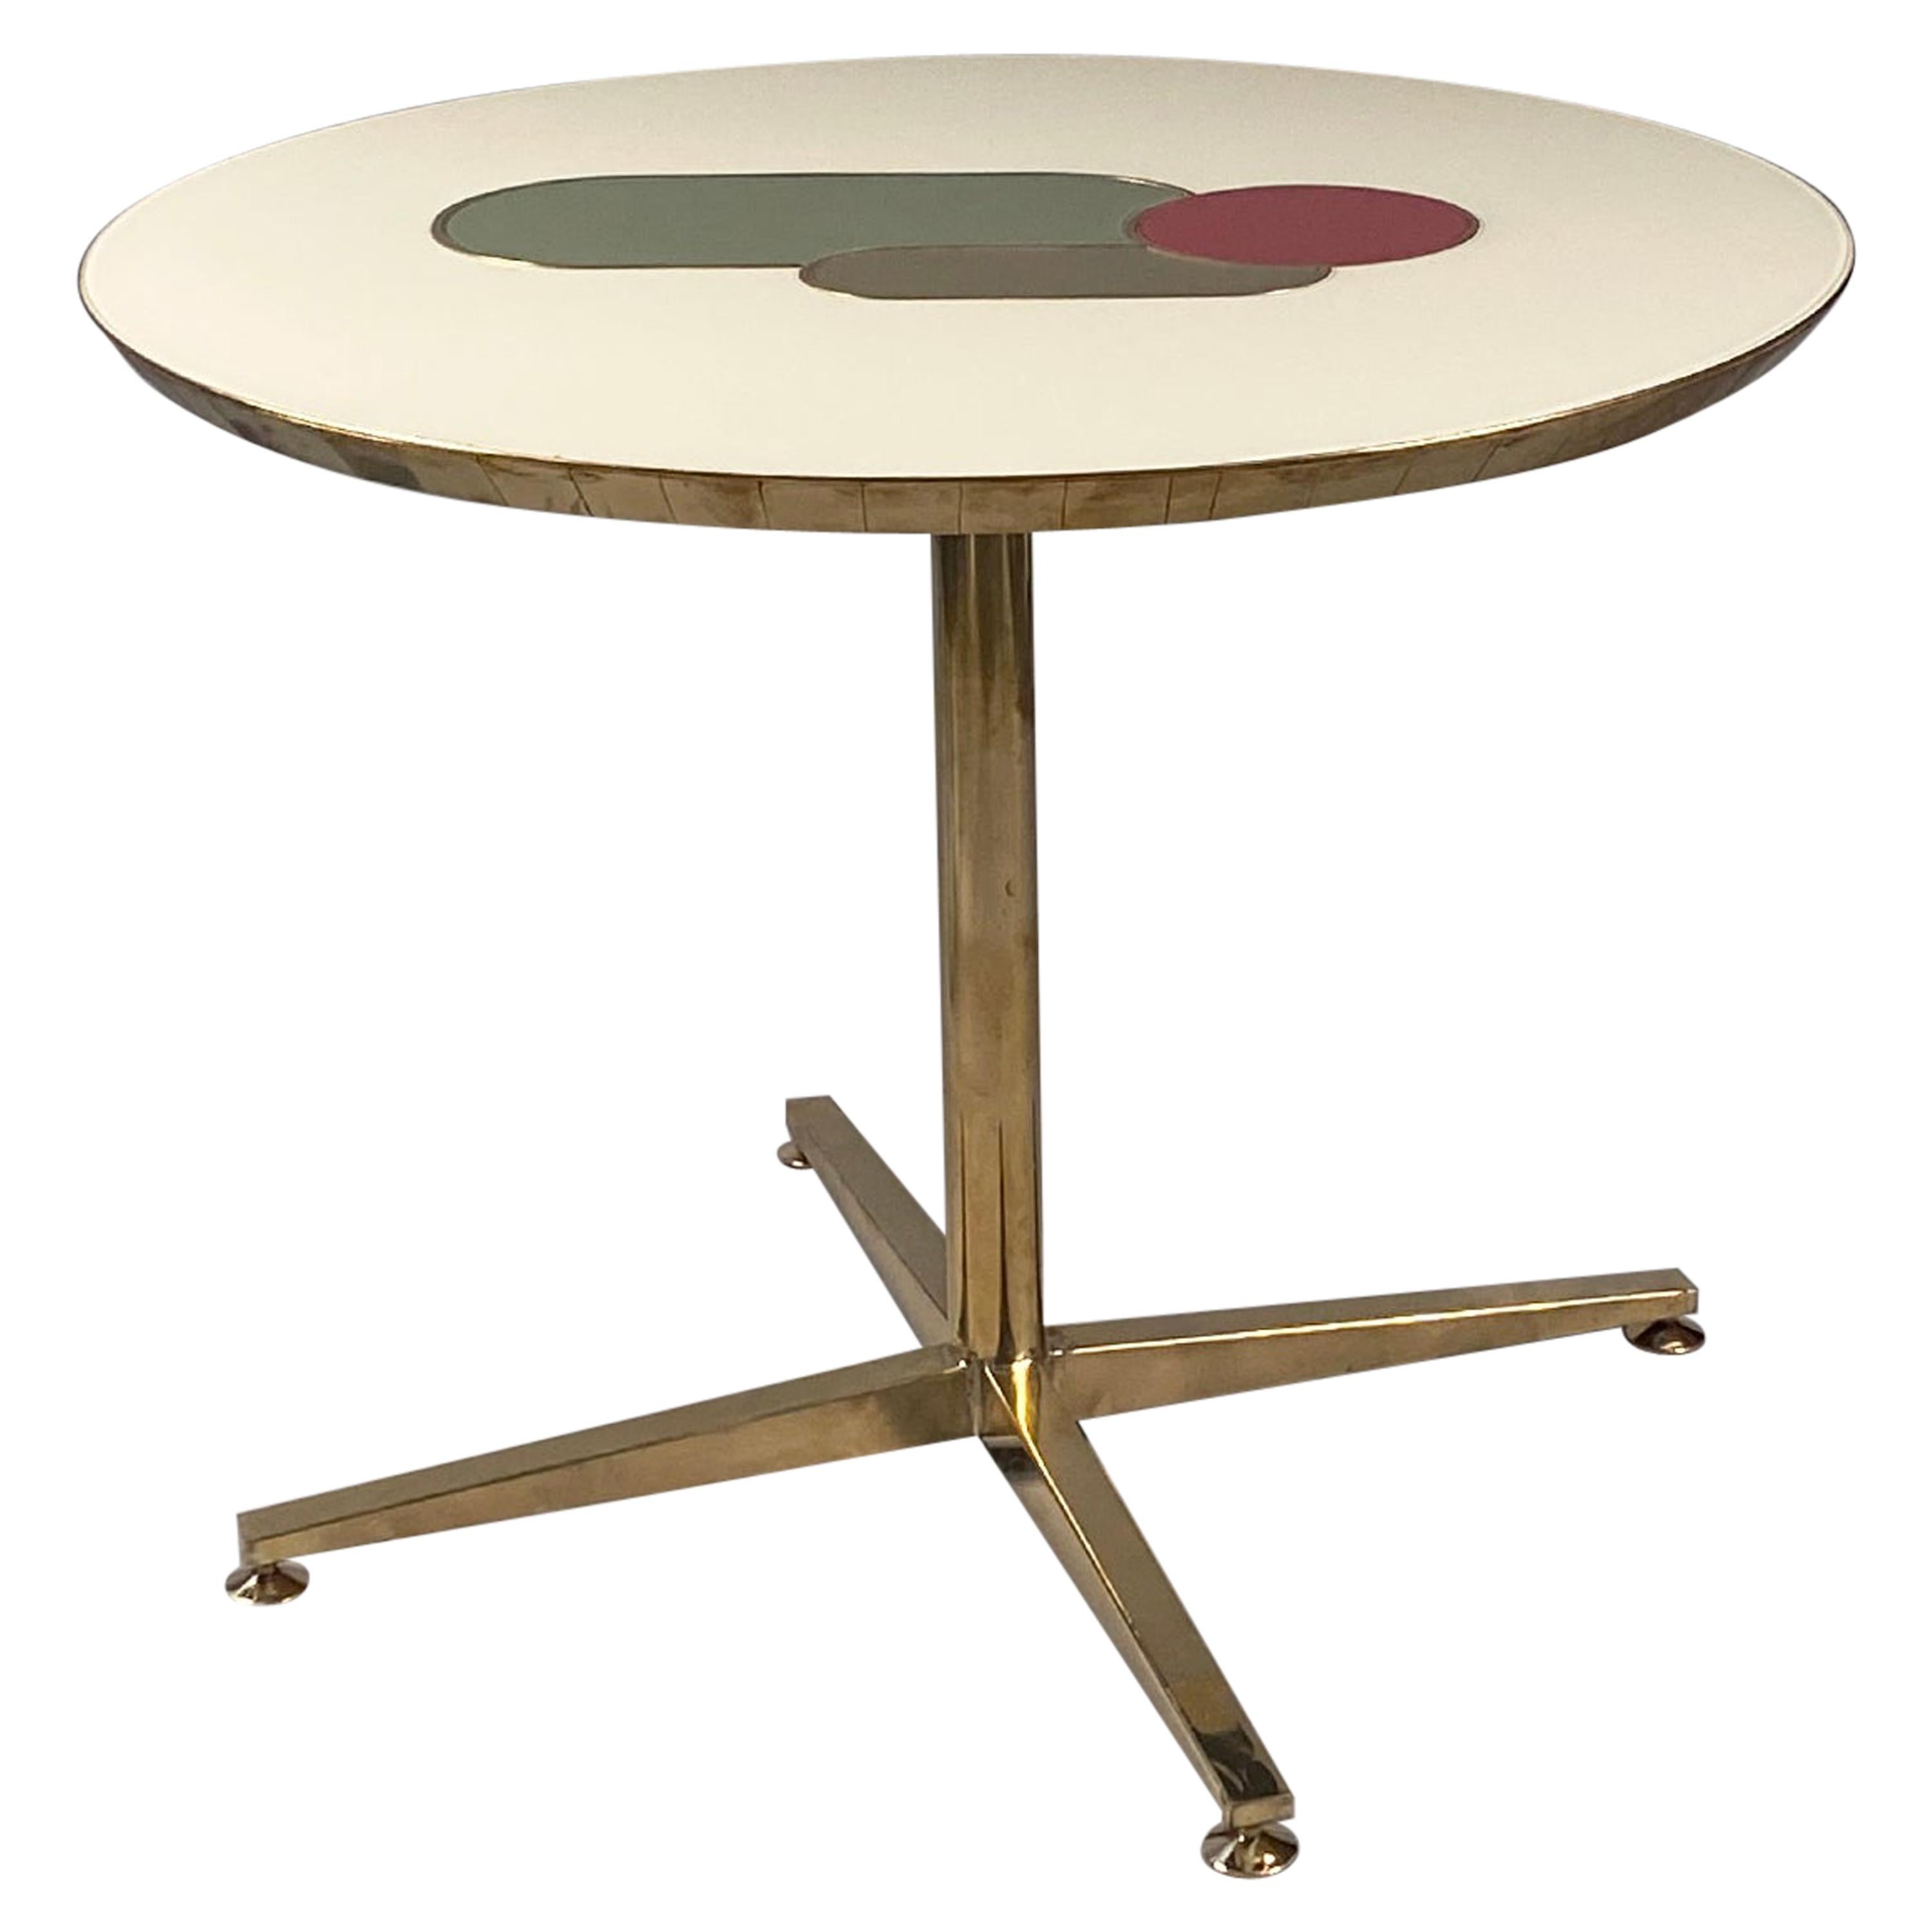 Table centrale / table d'appoint